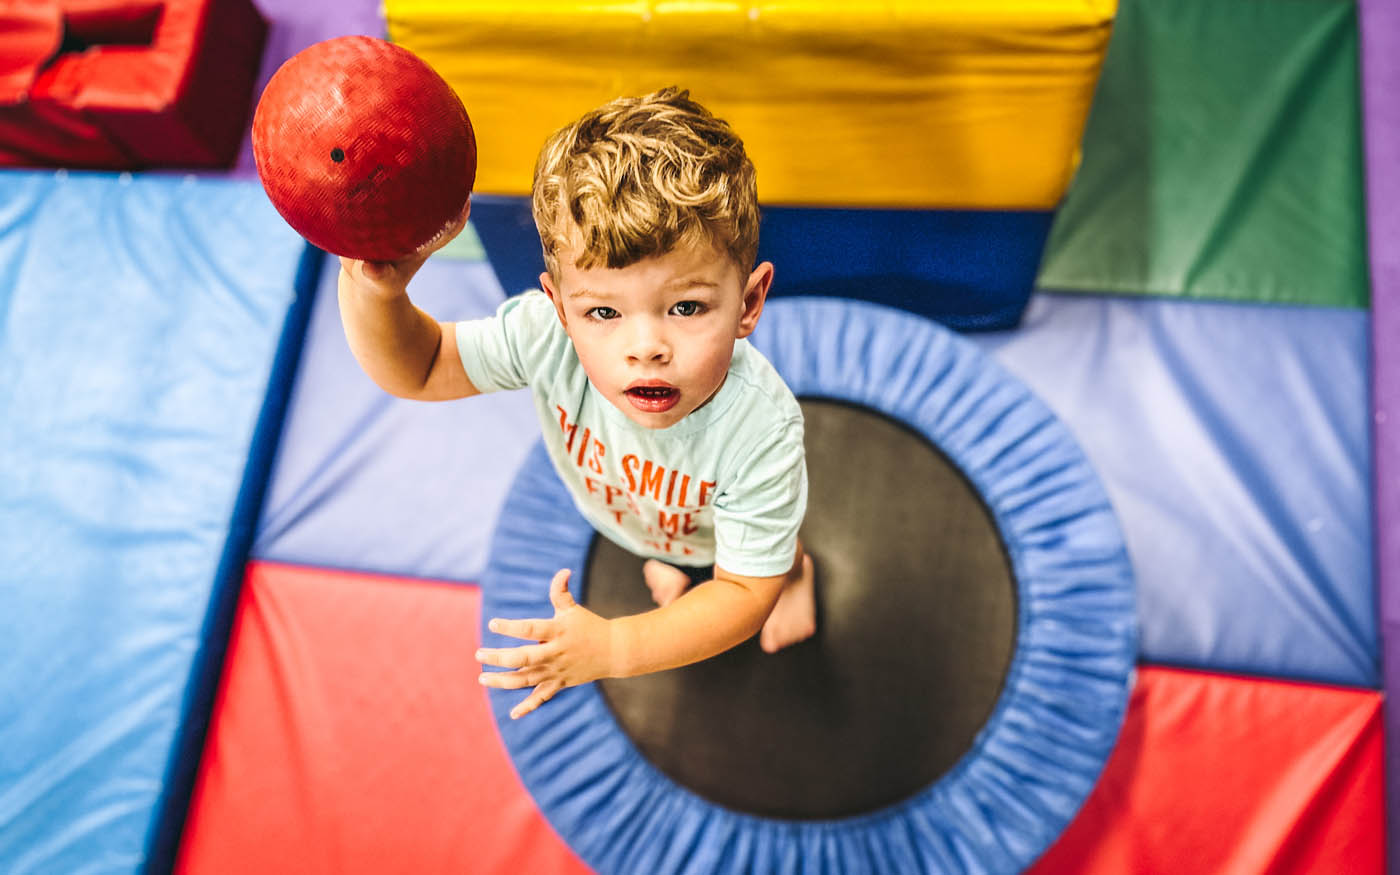 A toddler jumping on a Romp n' Roll tramp, learn more about our kids activities in St. Petersburg, FL.